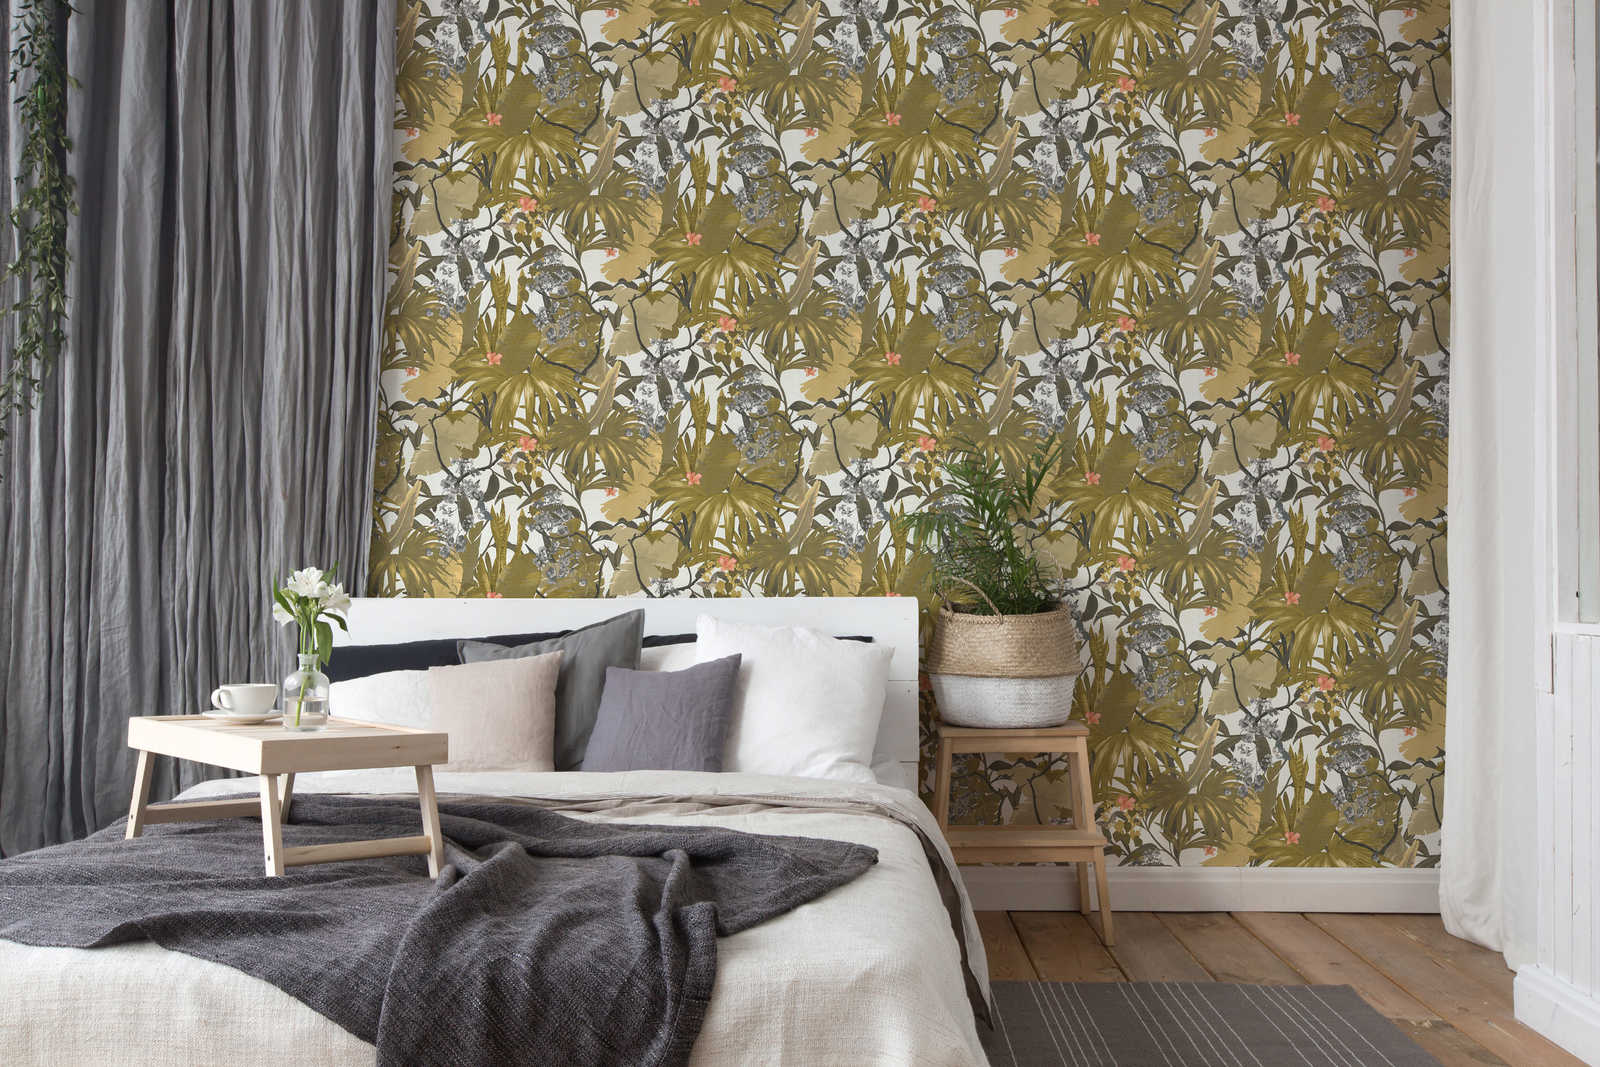             Wallpaper jungle design with leaf pattern - yellow, grey
        